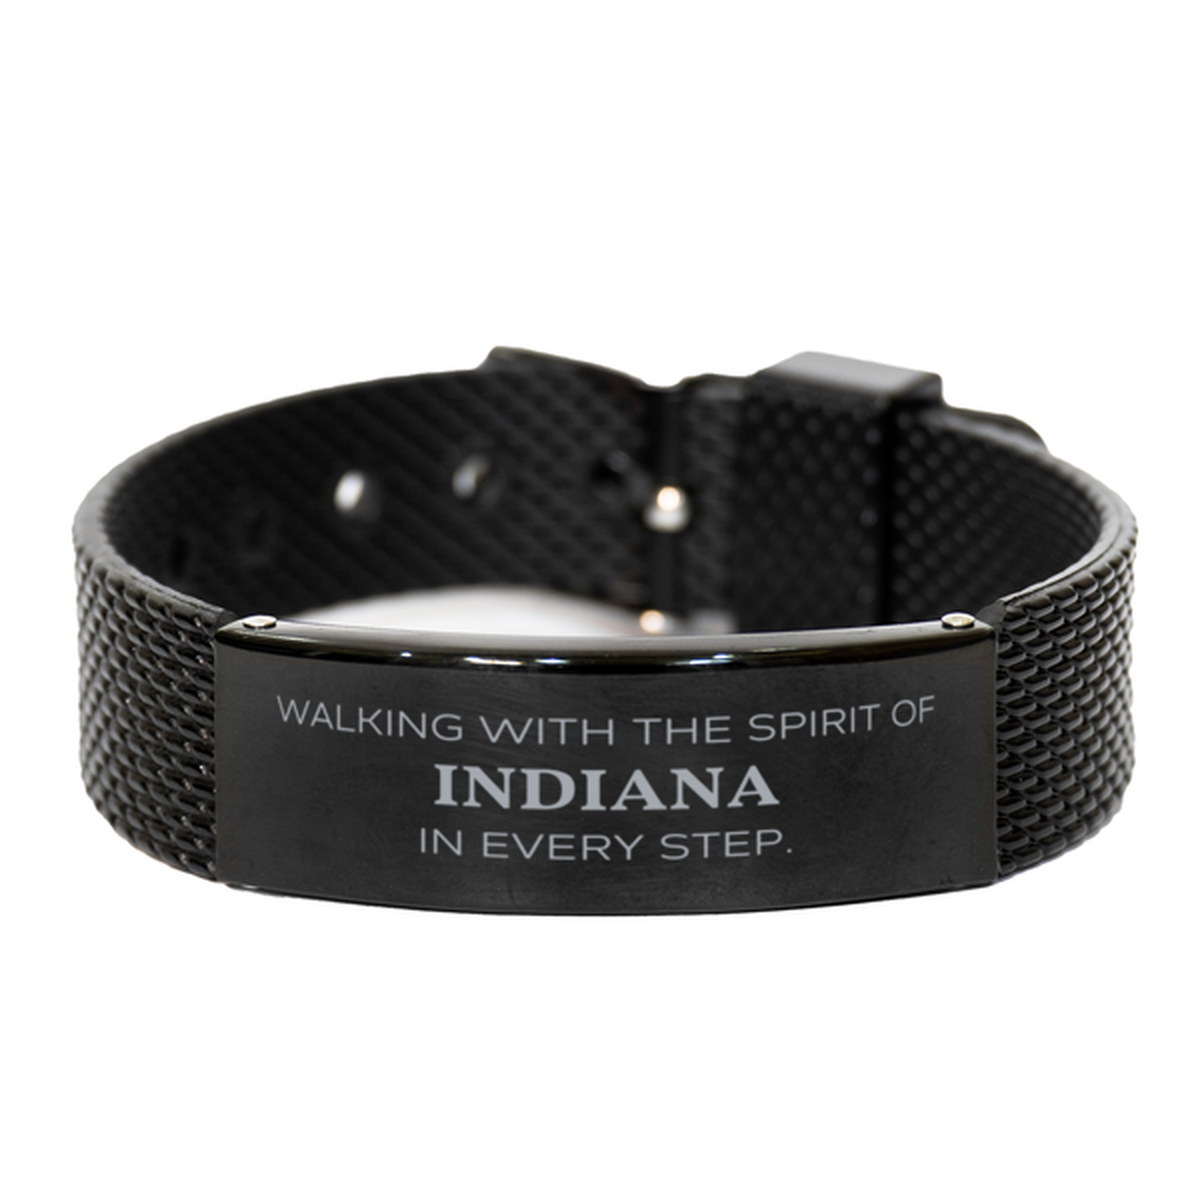 Indiana Gifts, Walking with the spirit, Love Indiana Birthday Christmas Black Shark Mesh Bracelet For Indiana People, Men, Women, Friends